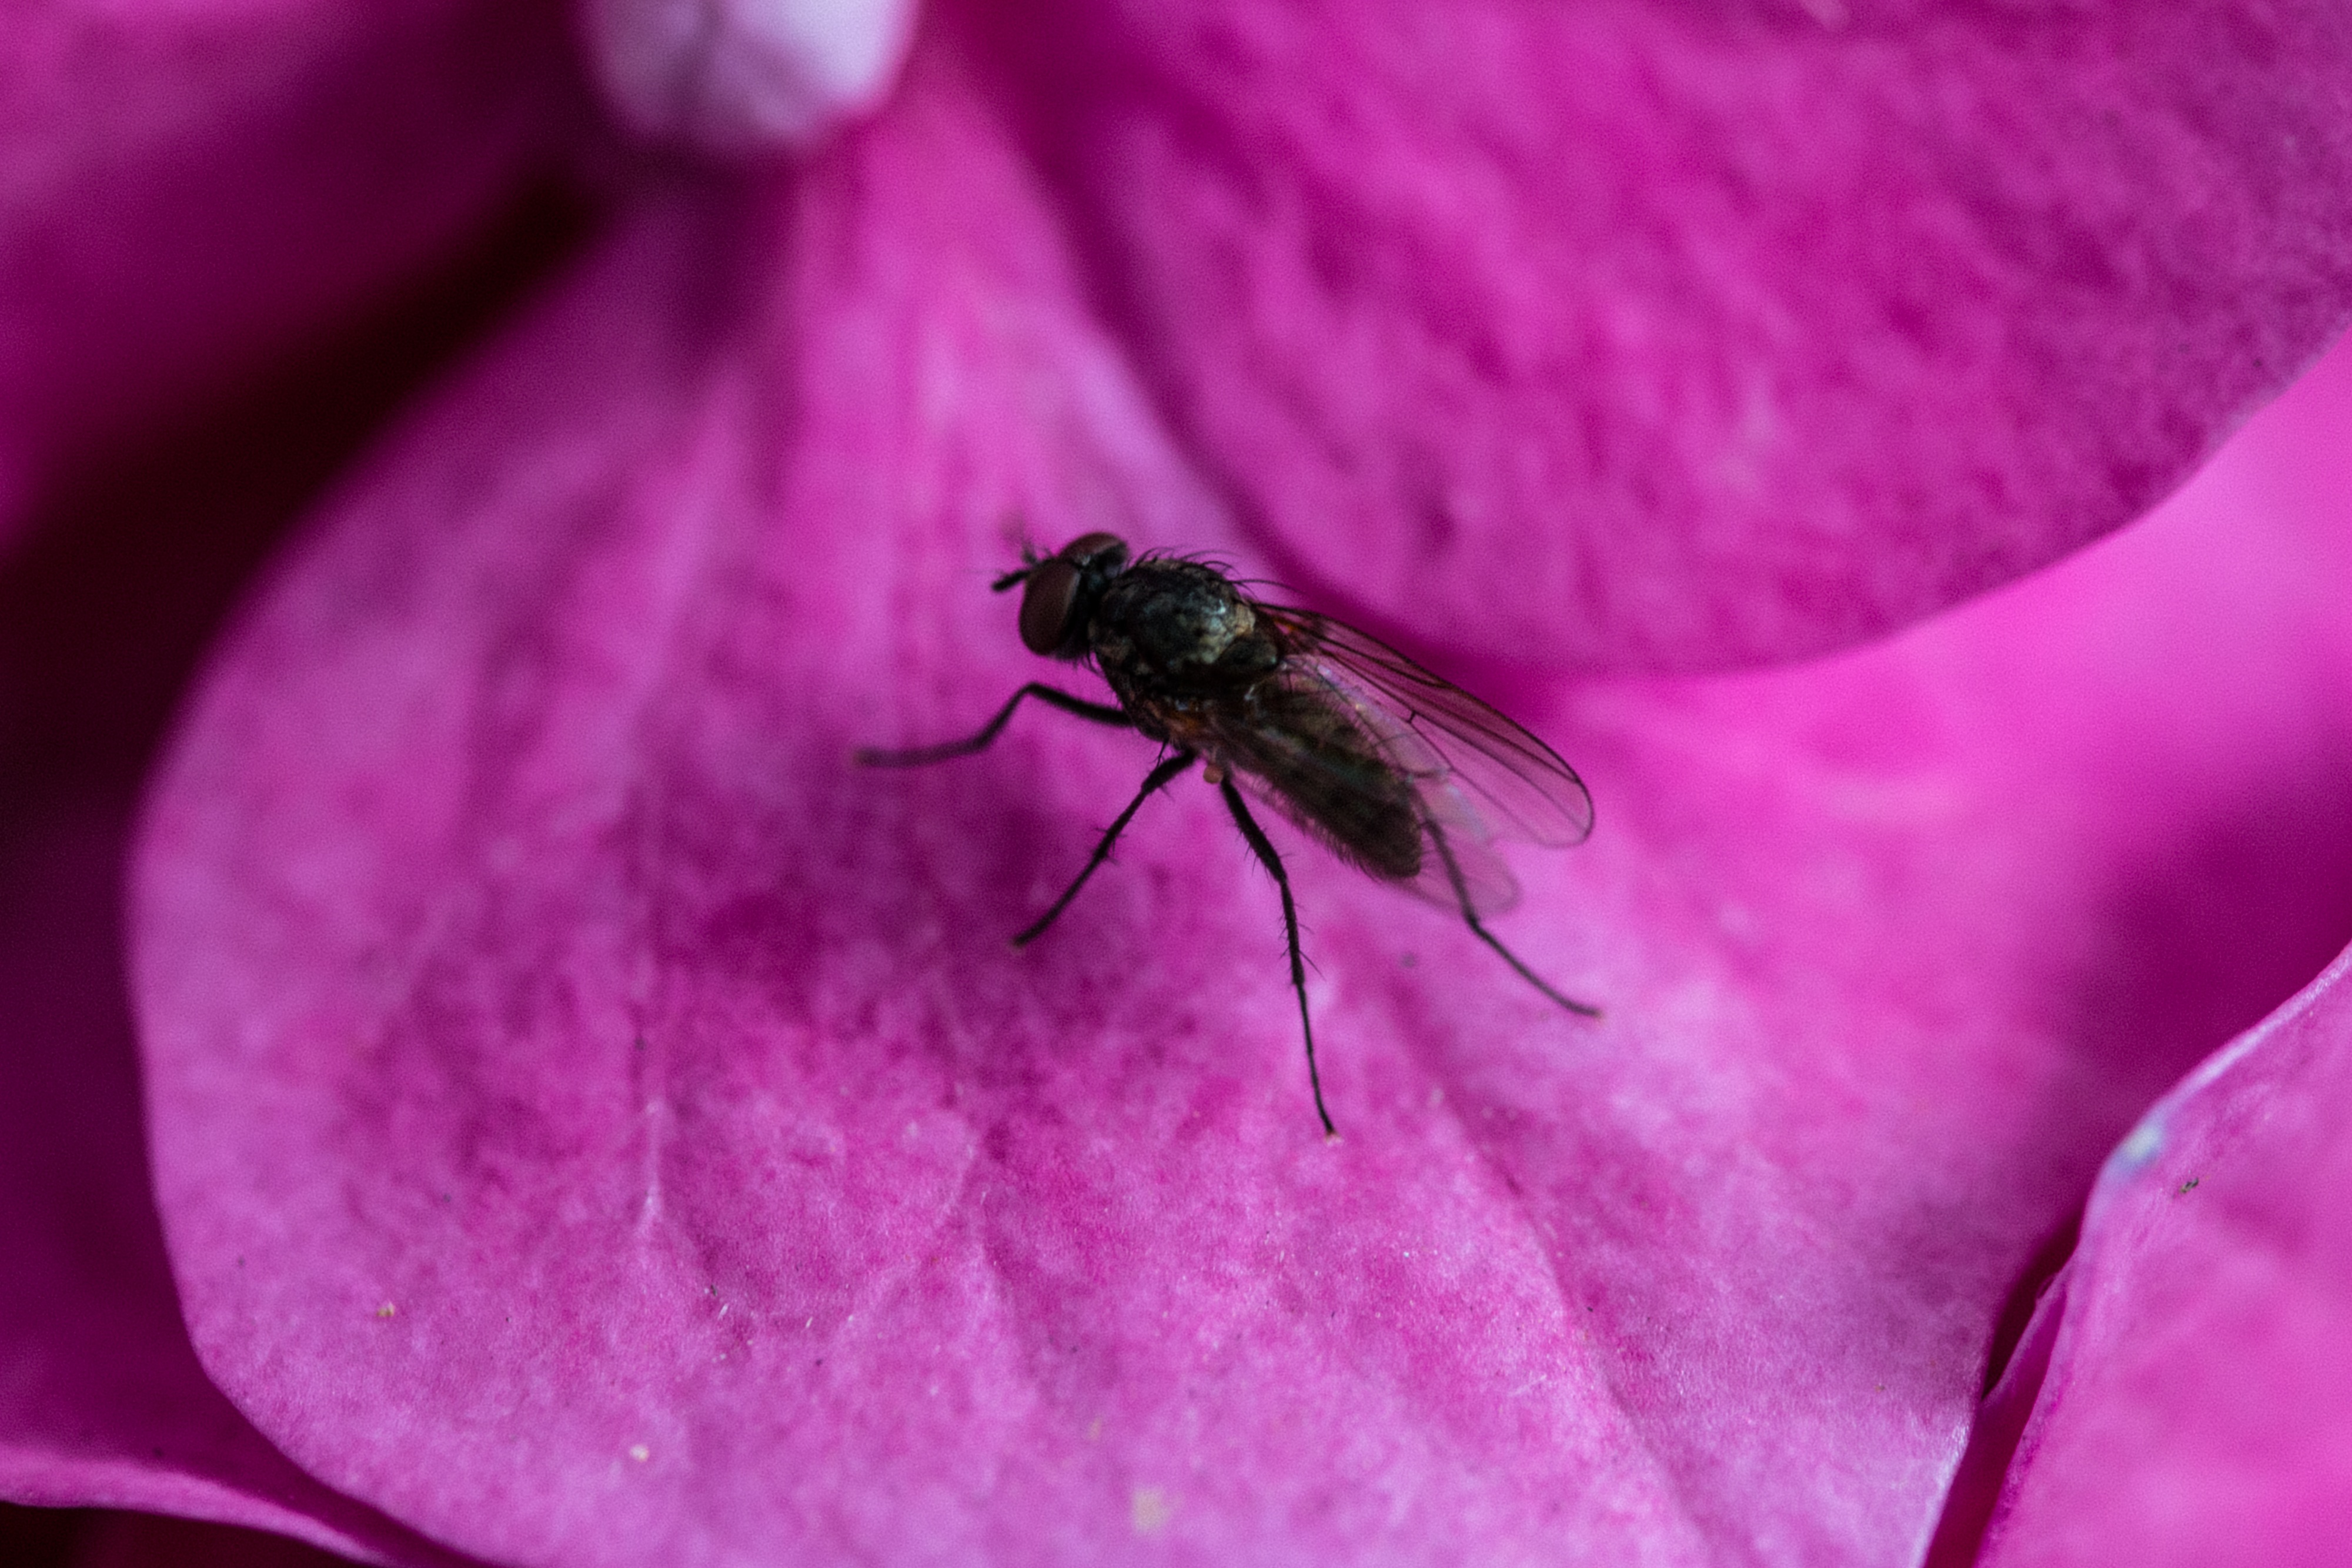 Fly on the flower photo